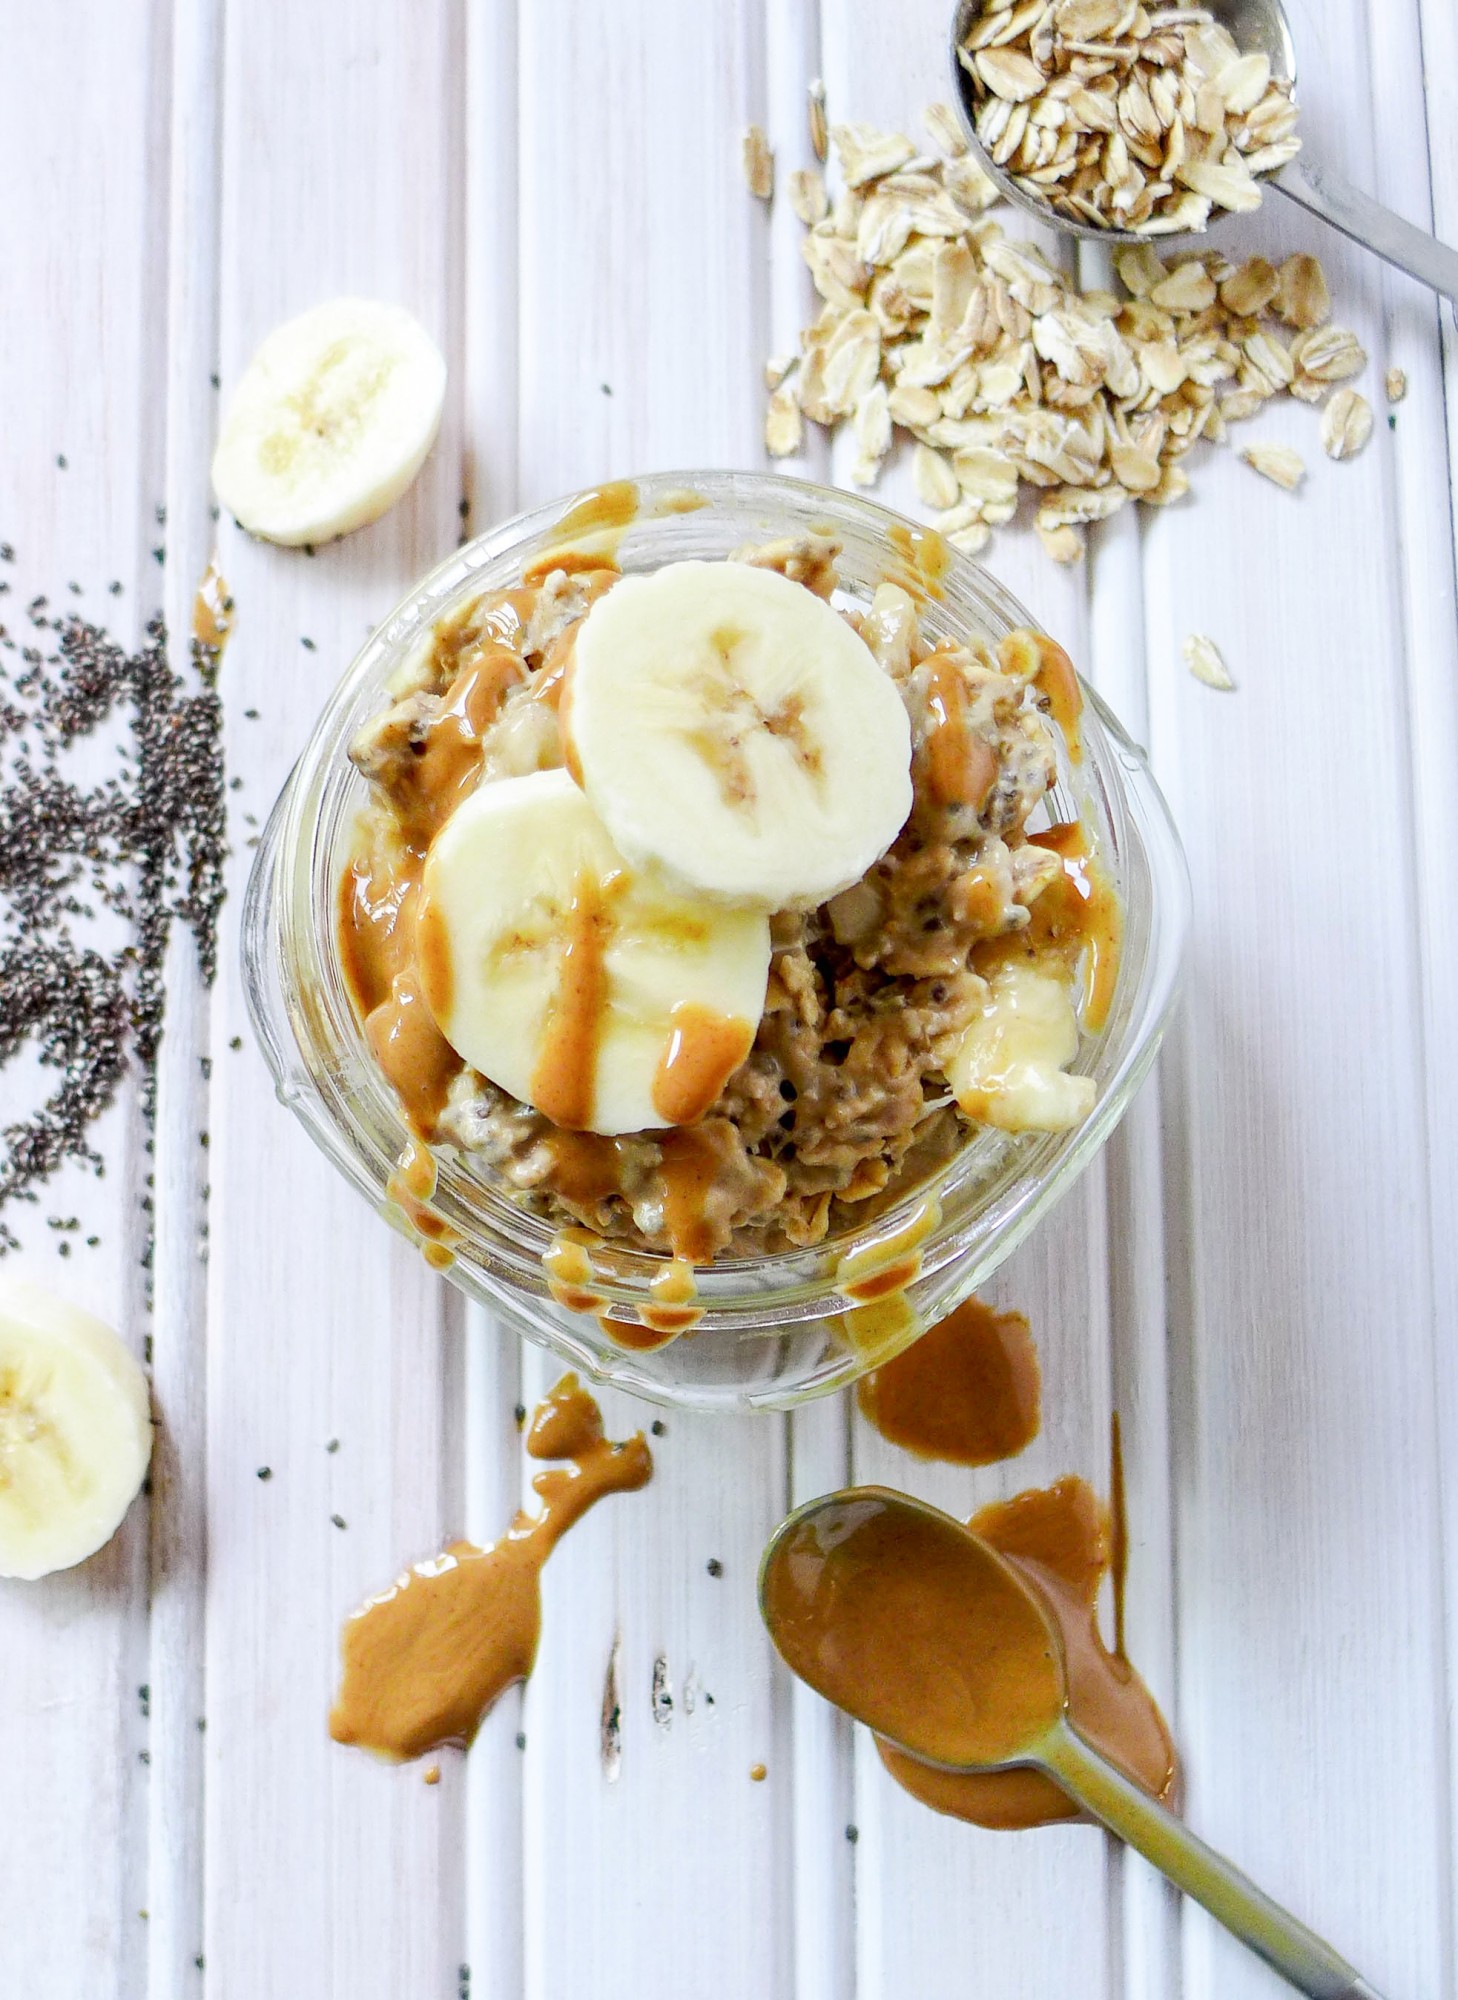 Too Busy For Breakfast? These Overnight Oats Recipes Are Game Changers ...